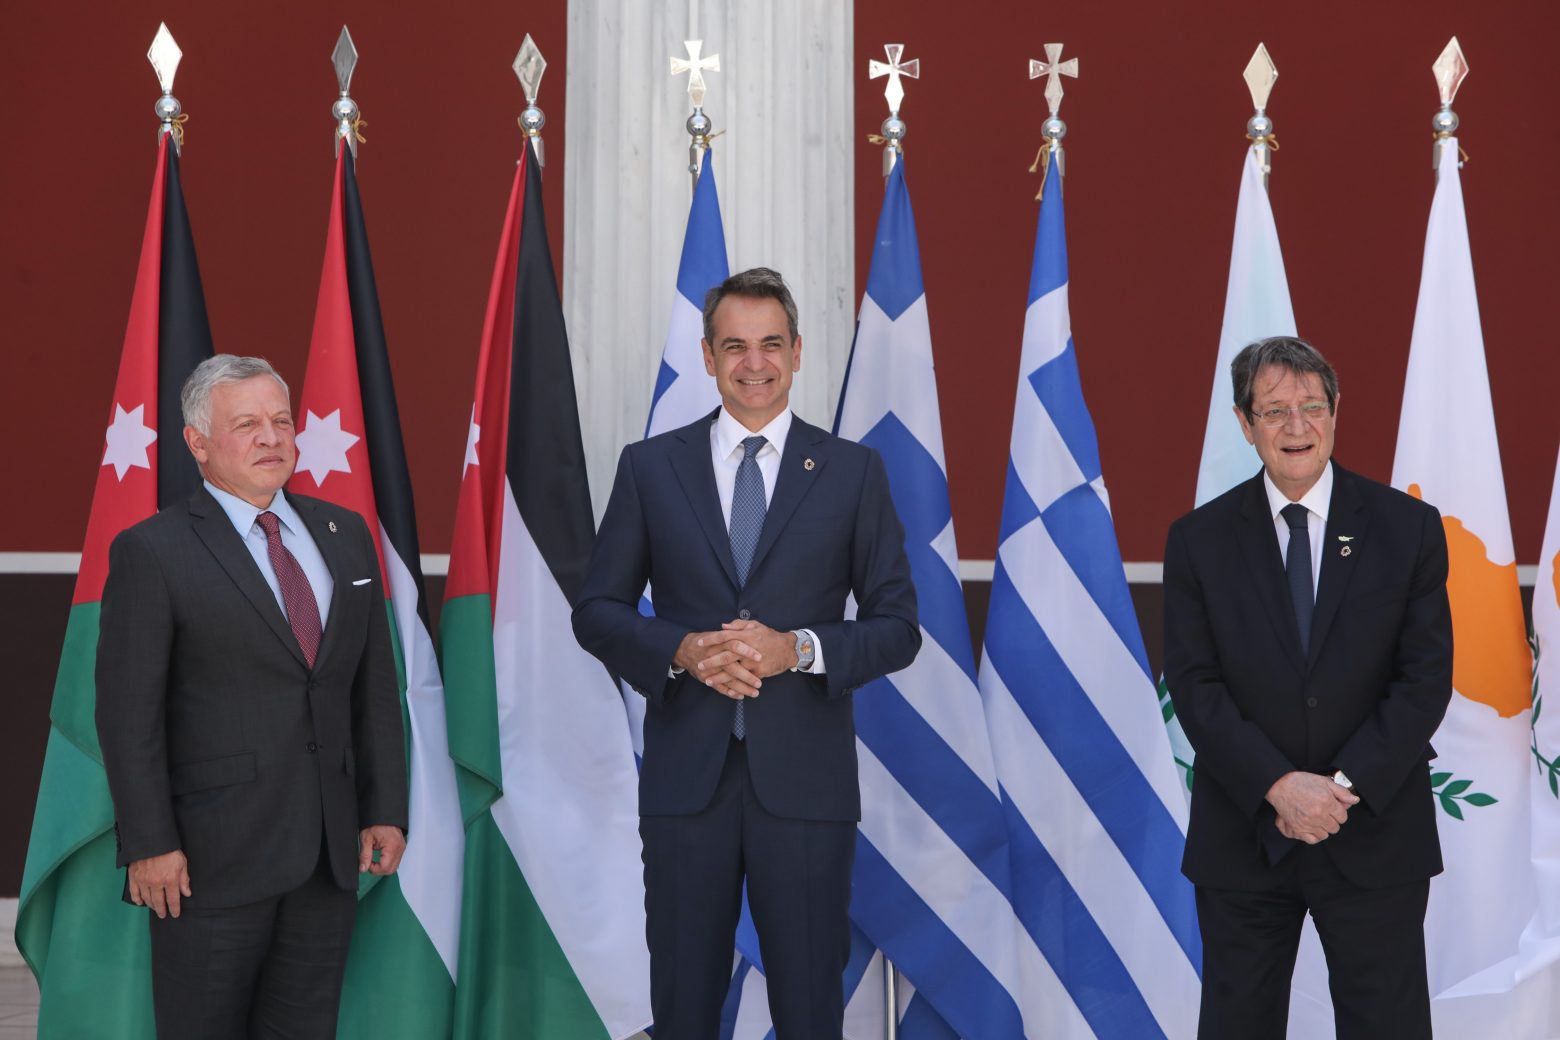 Tripartite Summit: “Greece, Cyprus and Jordan have deepened their cooperation”